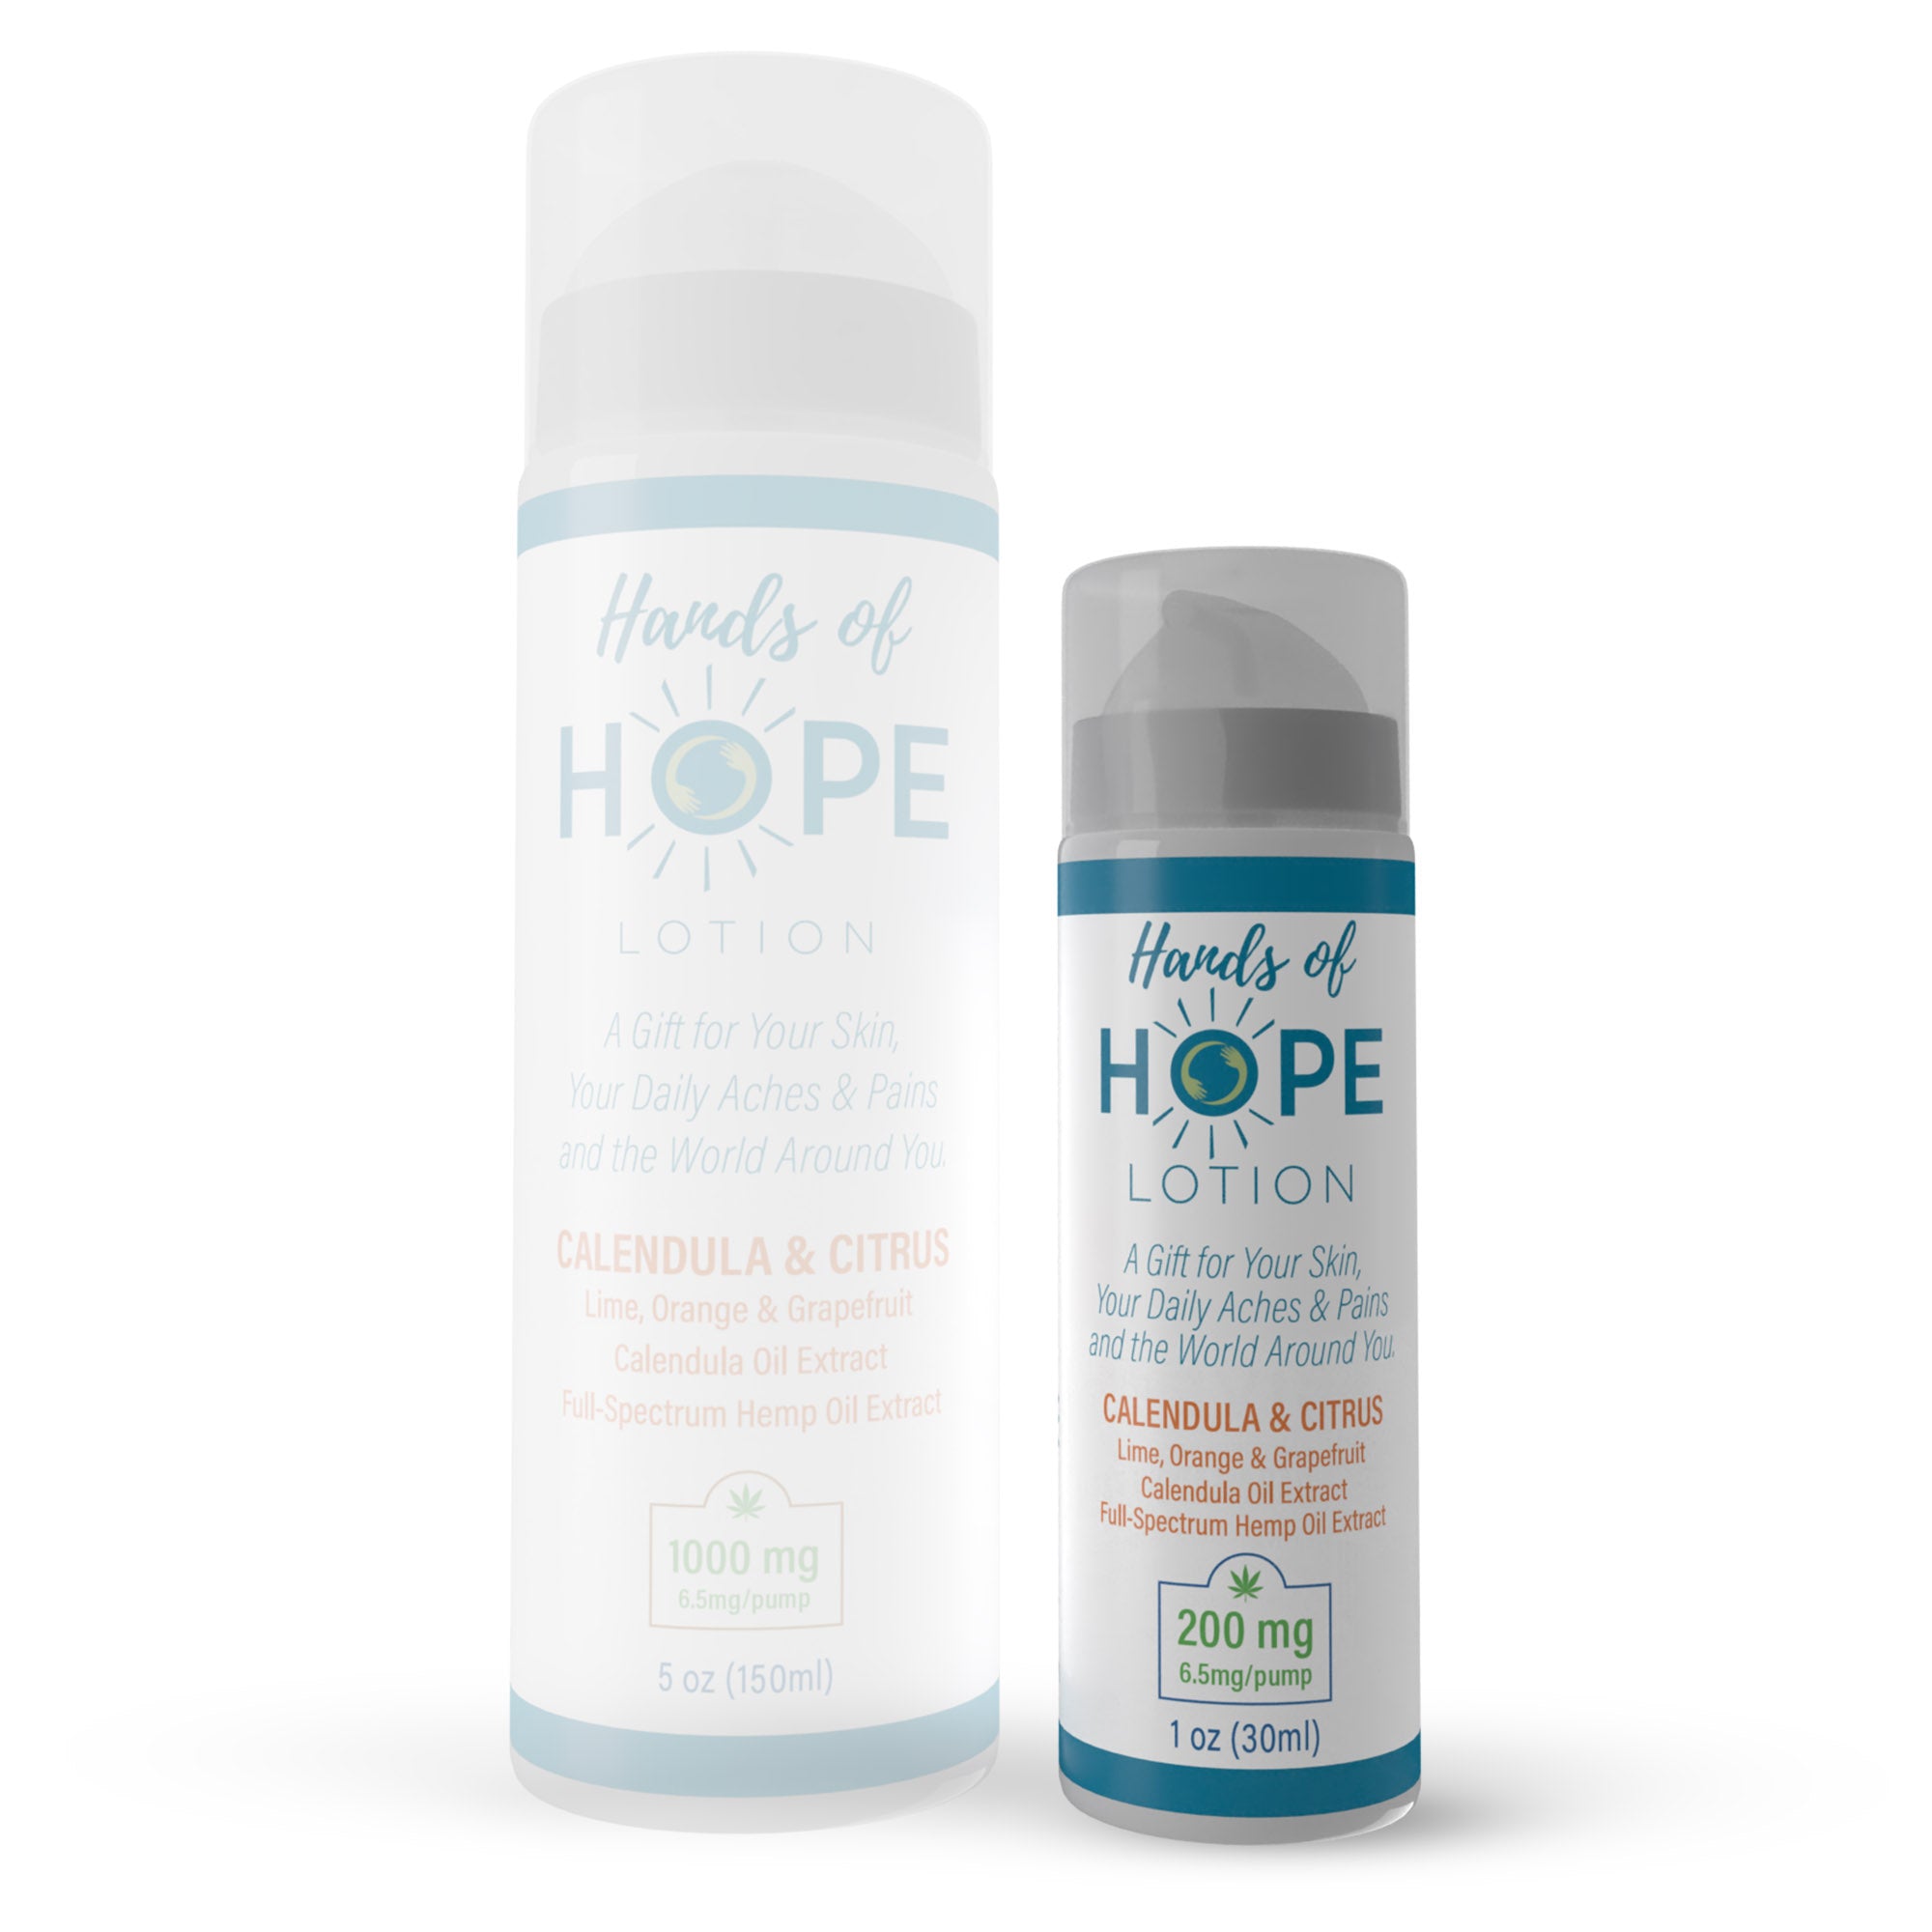 Hands of Hope Lotion for Gifts the Give Hope (Travel size)-When you give a gift, it does something.
Expressing genuine thoughtfulness can change hearts. And changed hearts can change lives.
This incredible lotion is inspired-Cedar Meadow Farm